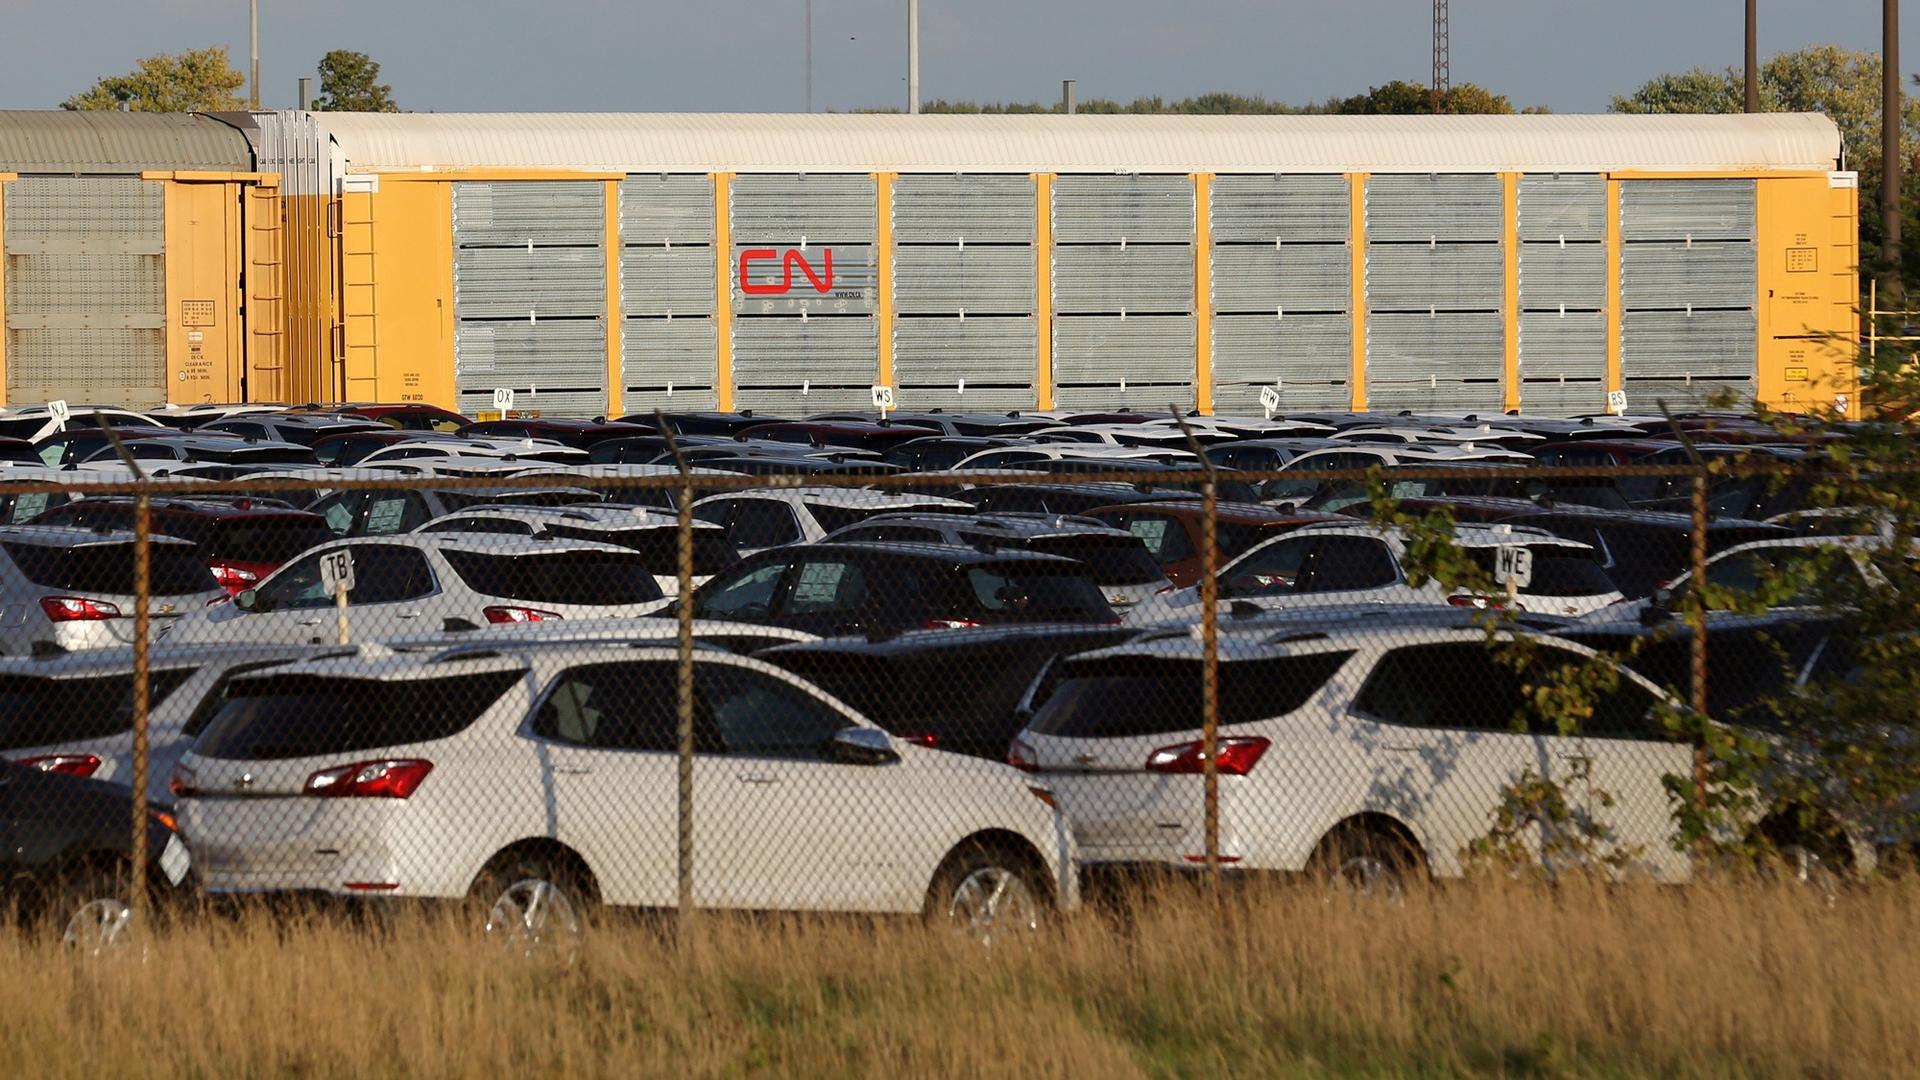 Chevrolet Equinox SUVs are shown parked in a fenced in area with CN Rail cars in tbe background.